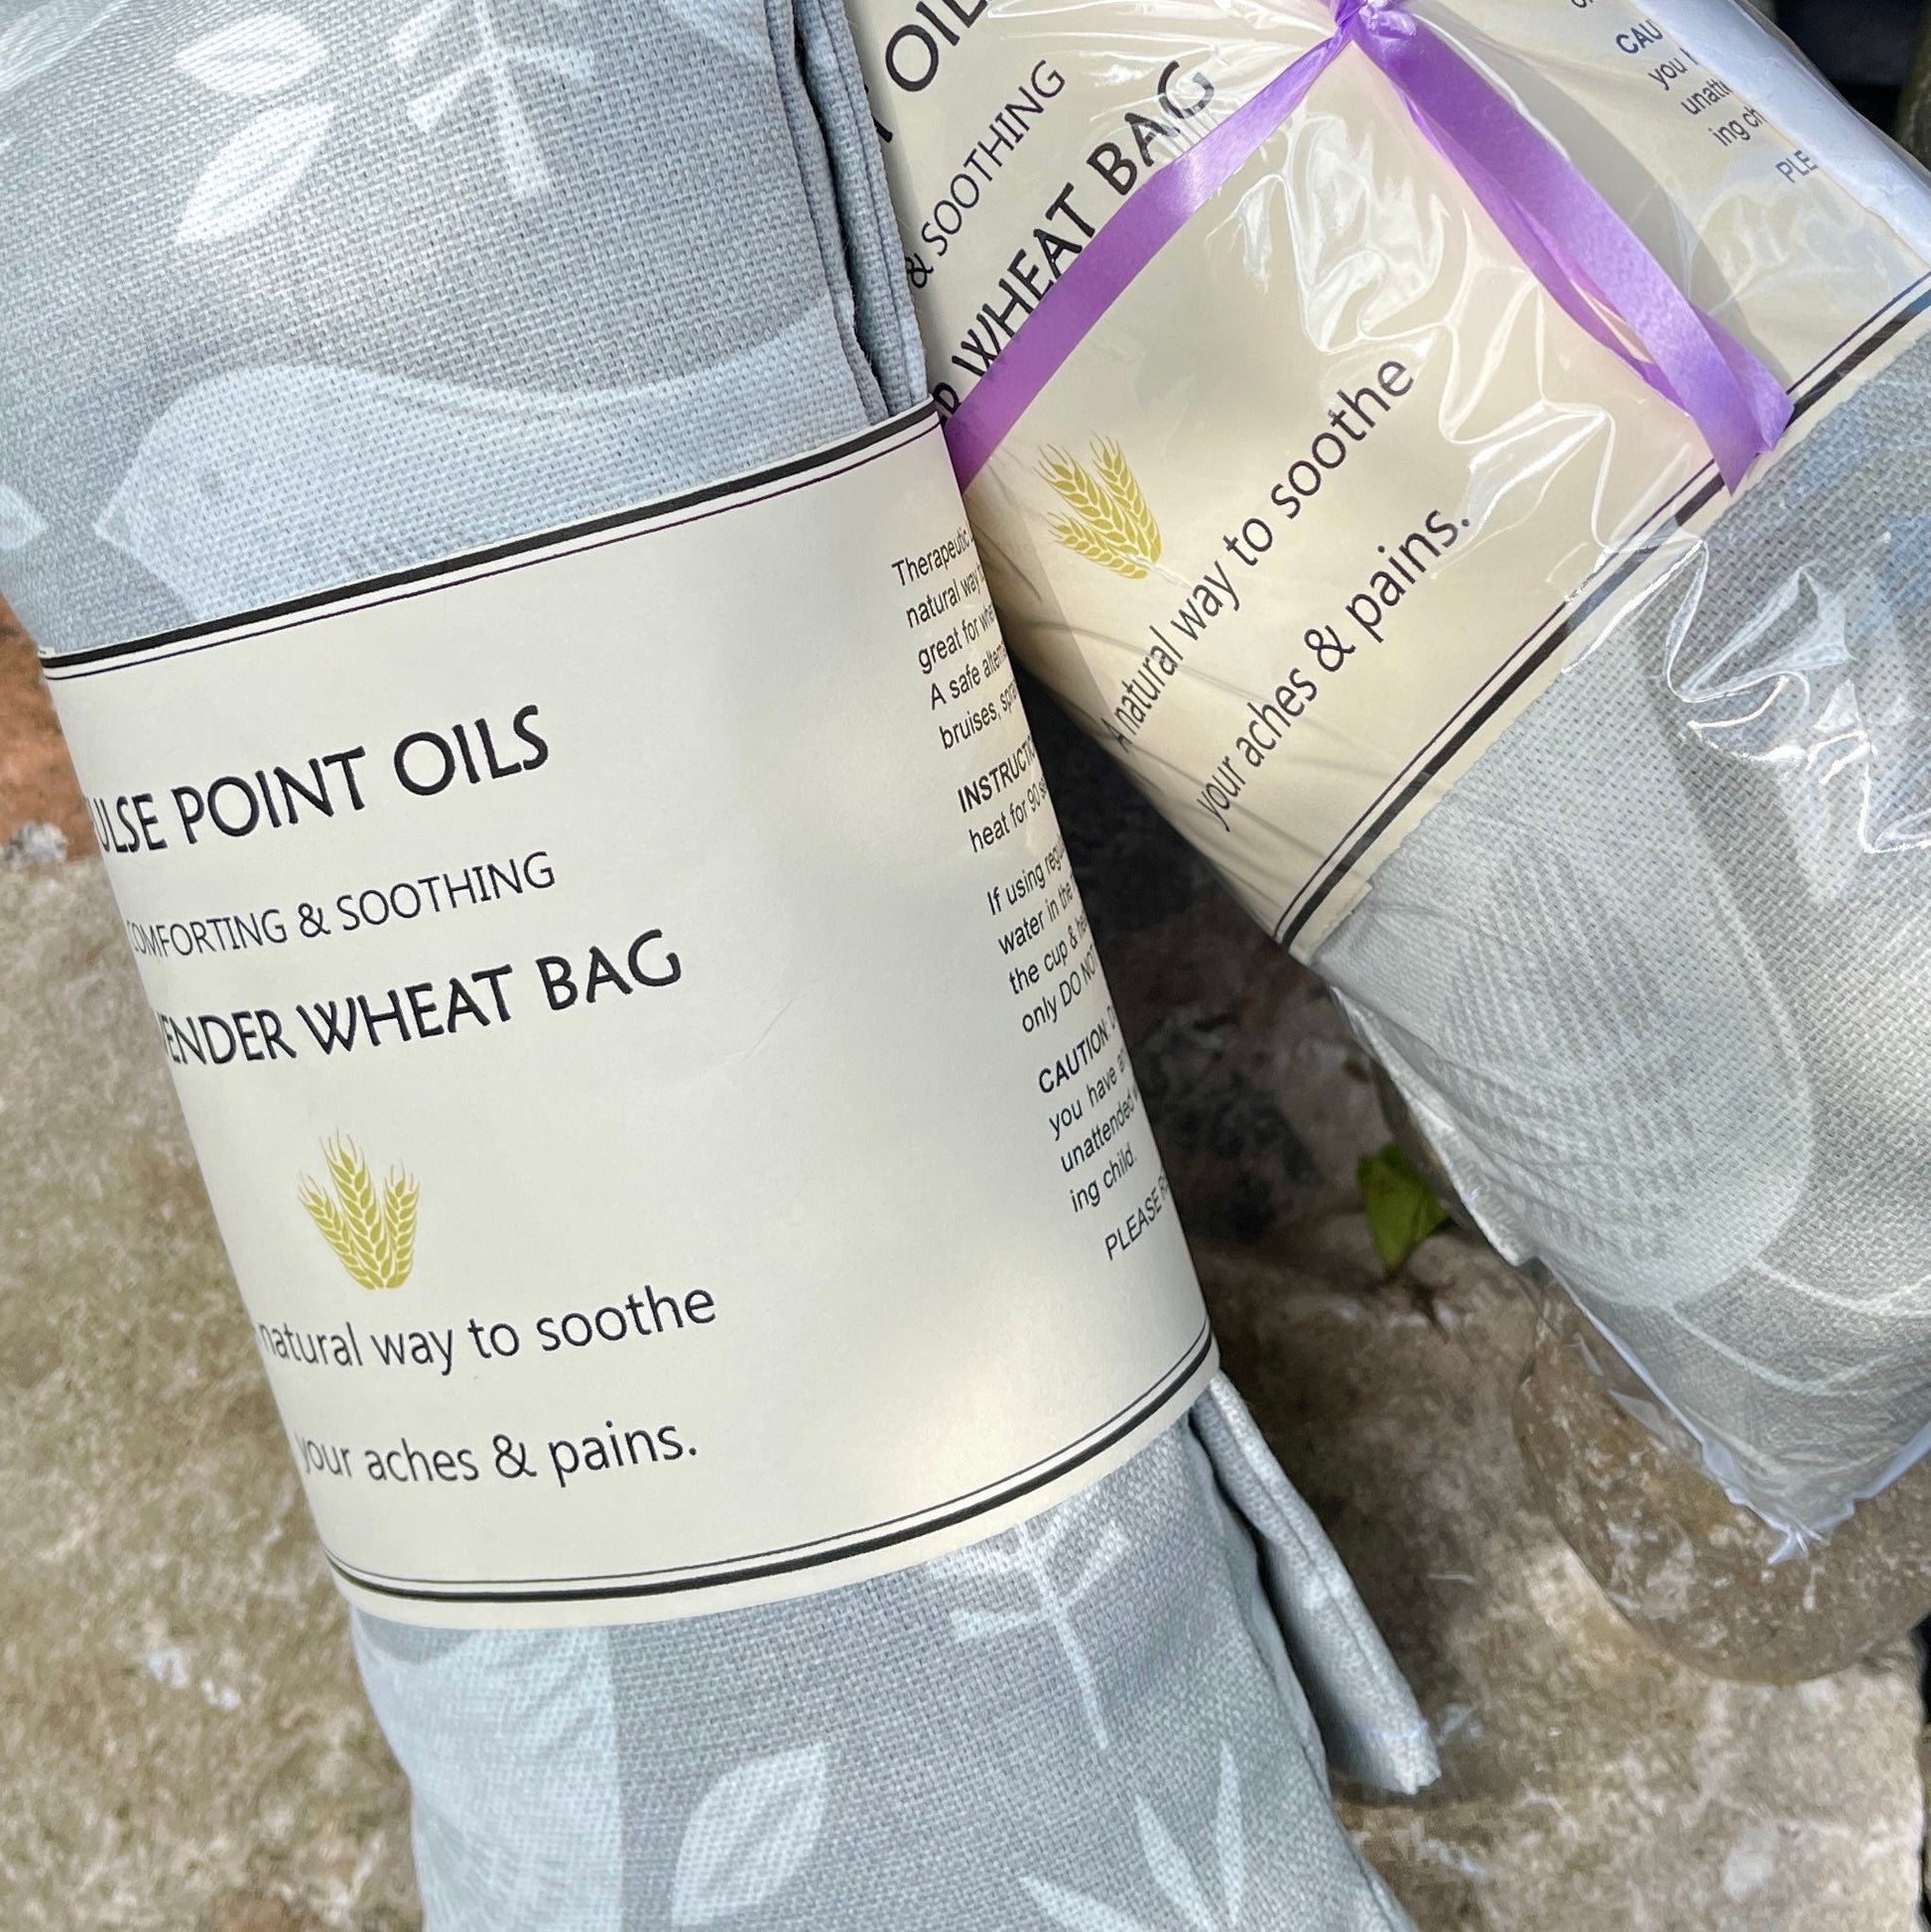 Two lavender wheat bags for natural pain relief and restful sleep heating pads